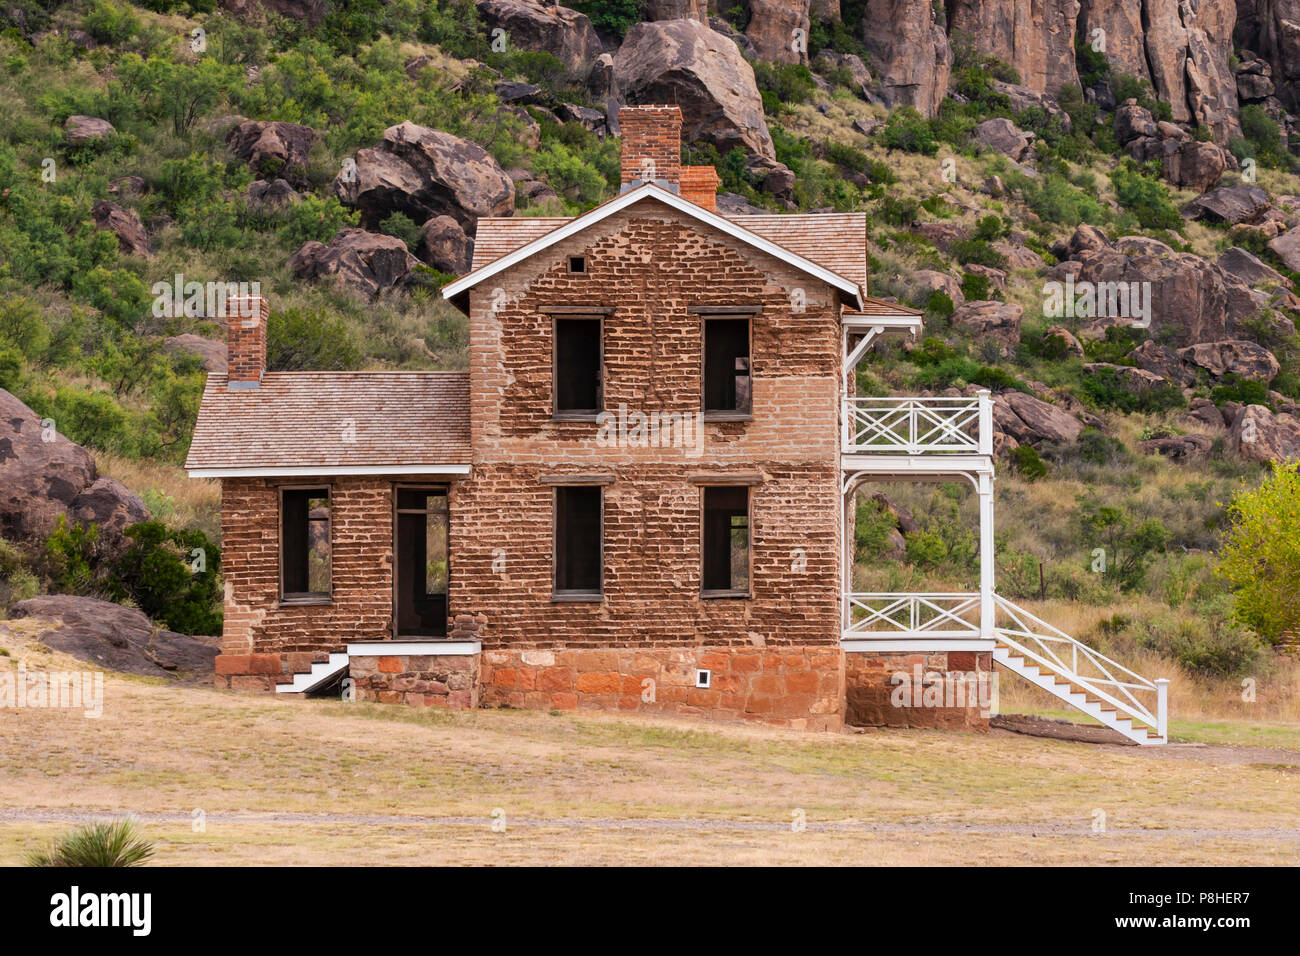 Fort Davis National Historic Site, a unit of the National Park Service, in southwest Texas. Fort Davis was a frontier military post. Stock Photo